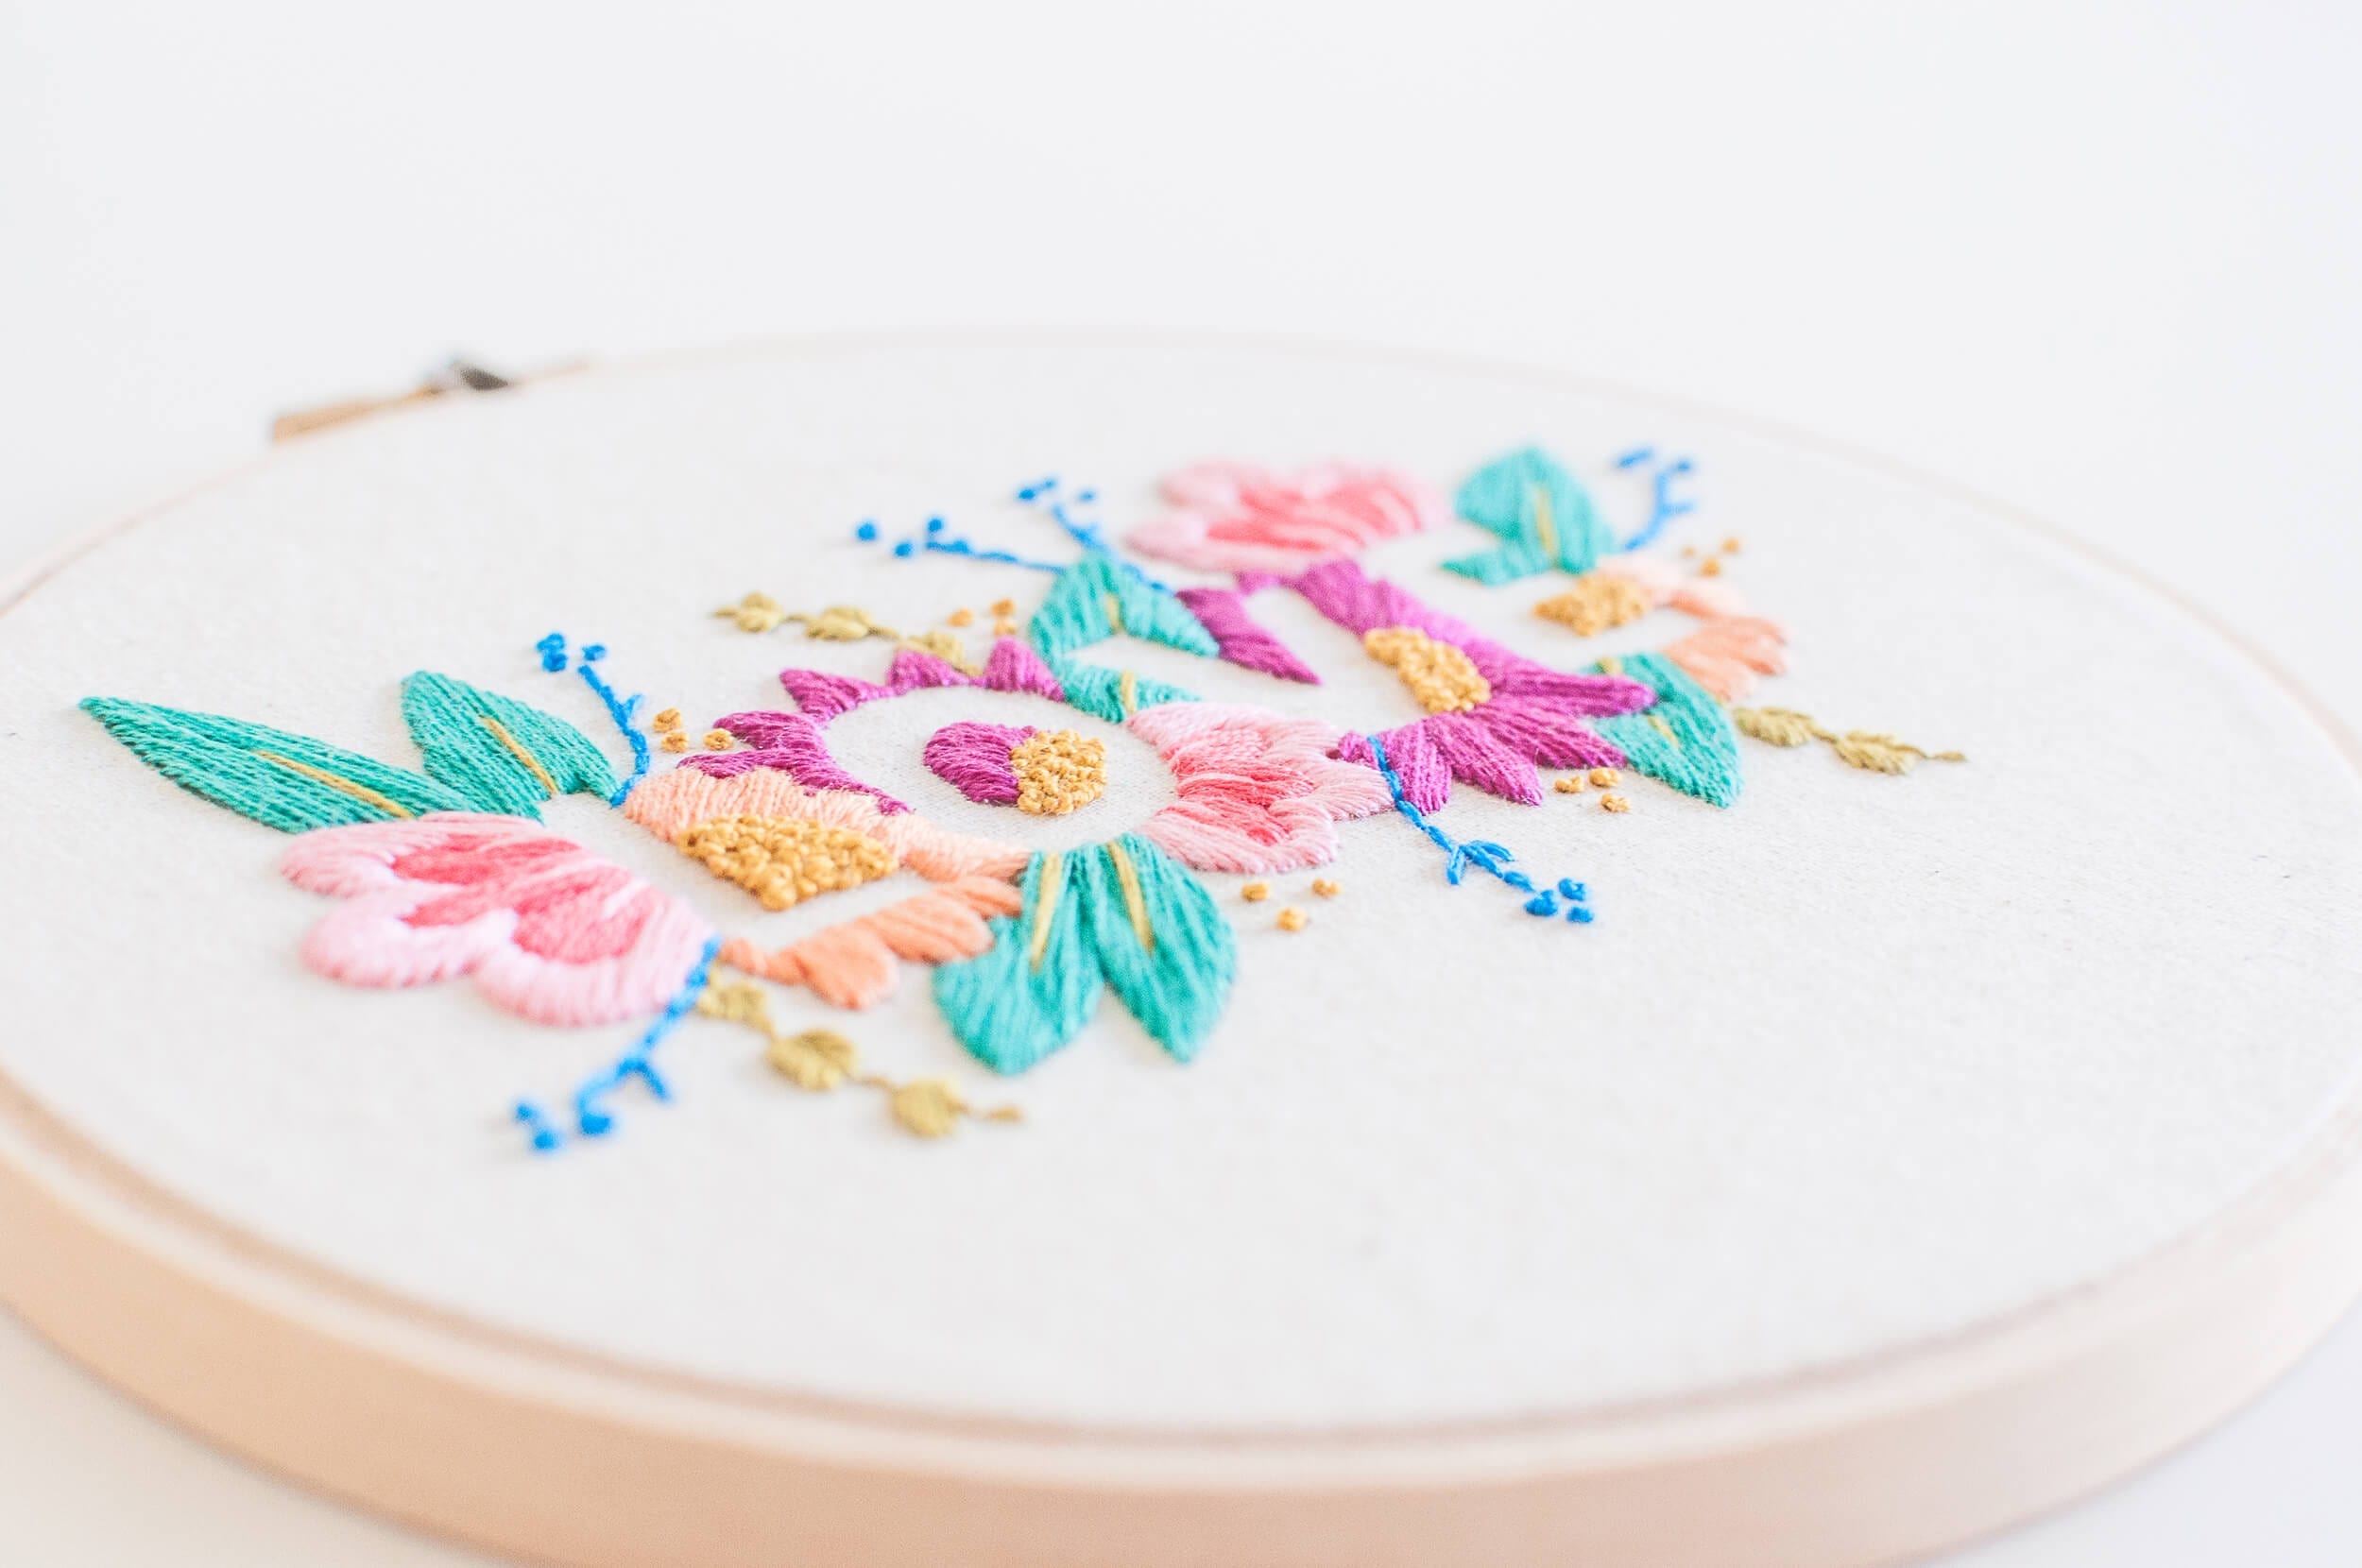 LOVE Embroidery Kit - Brynn & Co.